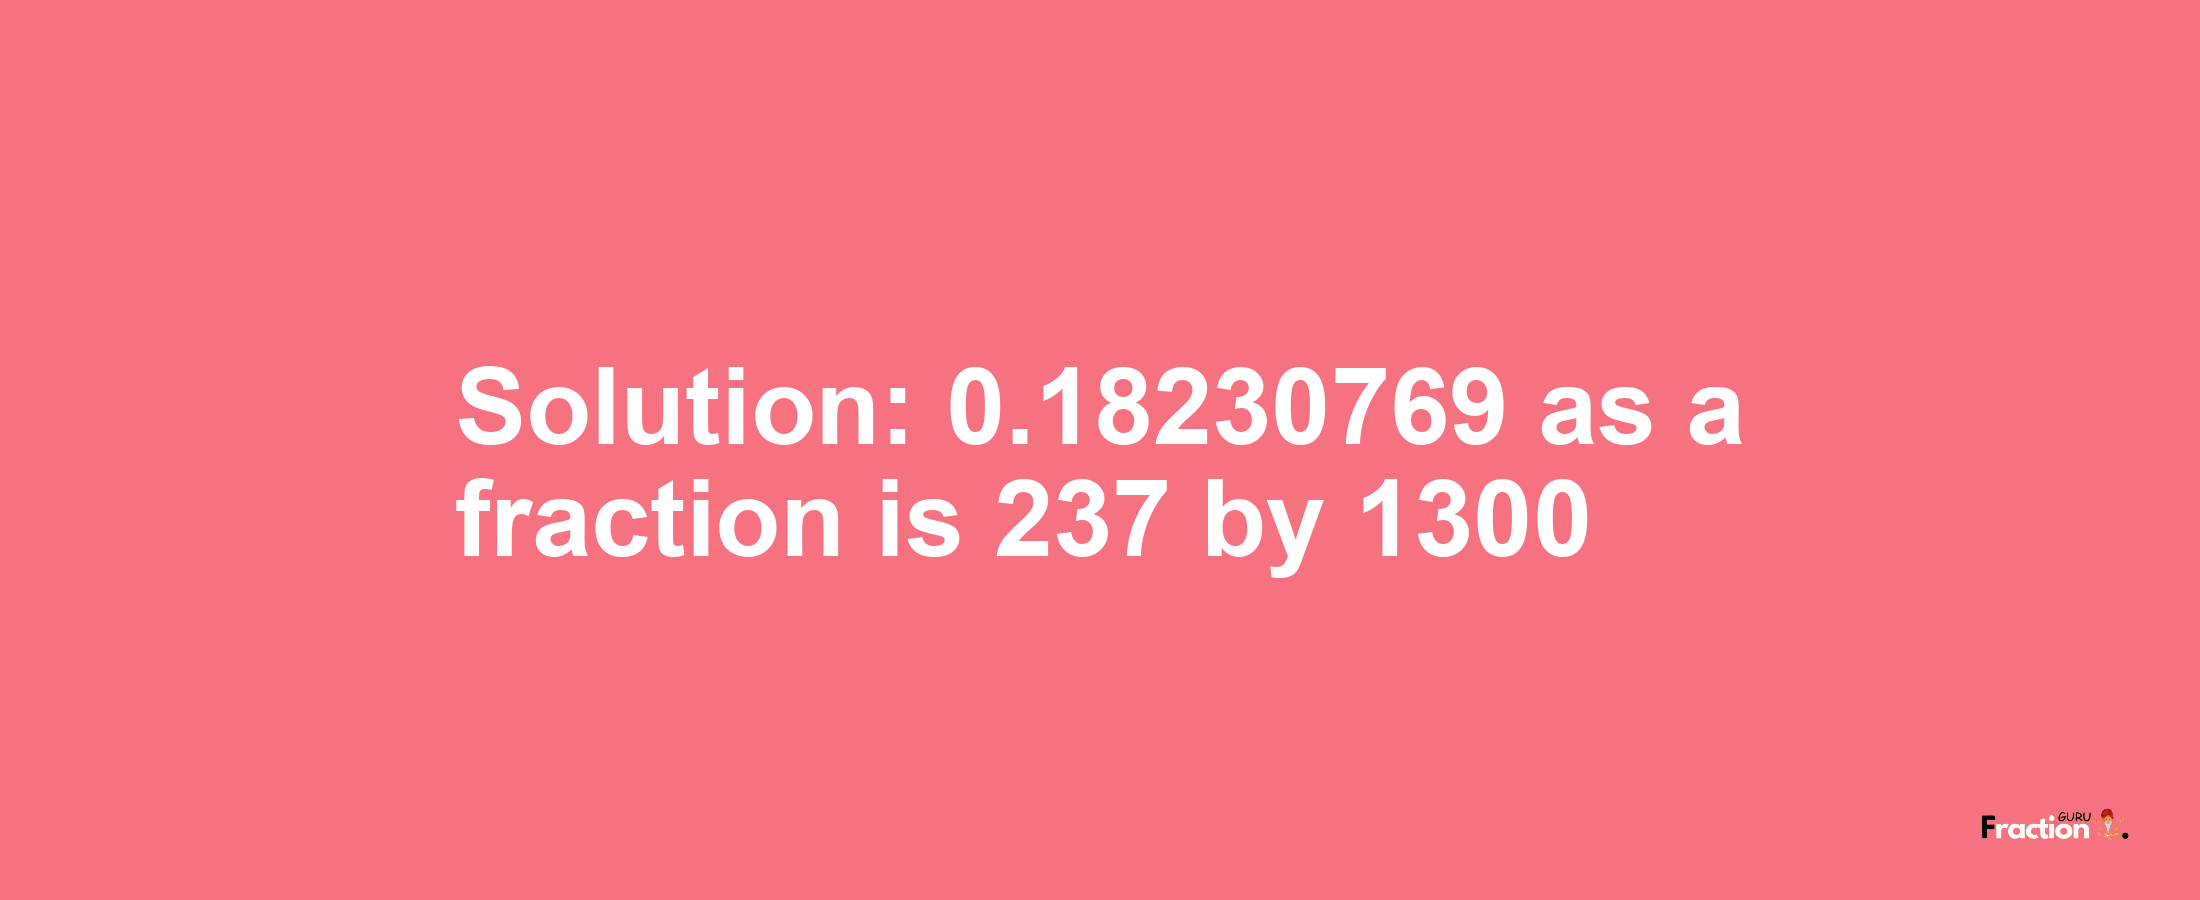 Solution:0.18230769 as a fraction is 237/1300